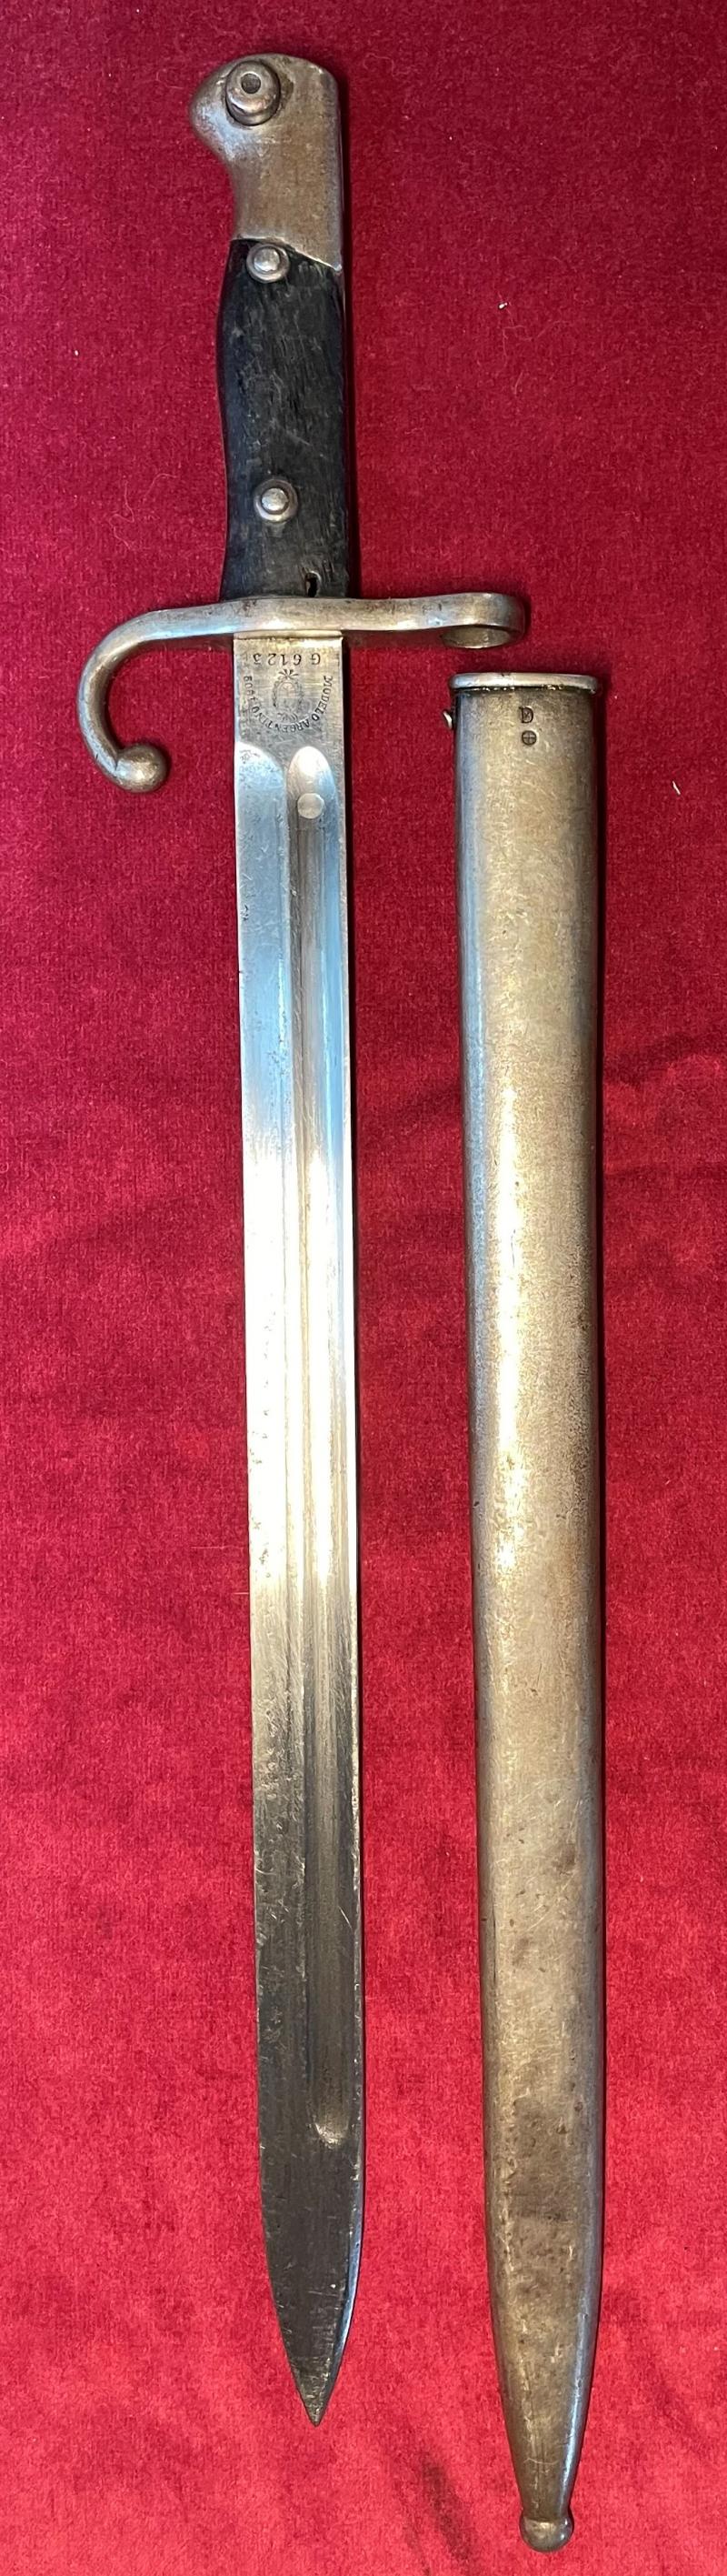 Argentine sword bayonet M1909 2nd pattern (matching numbers!)